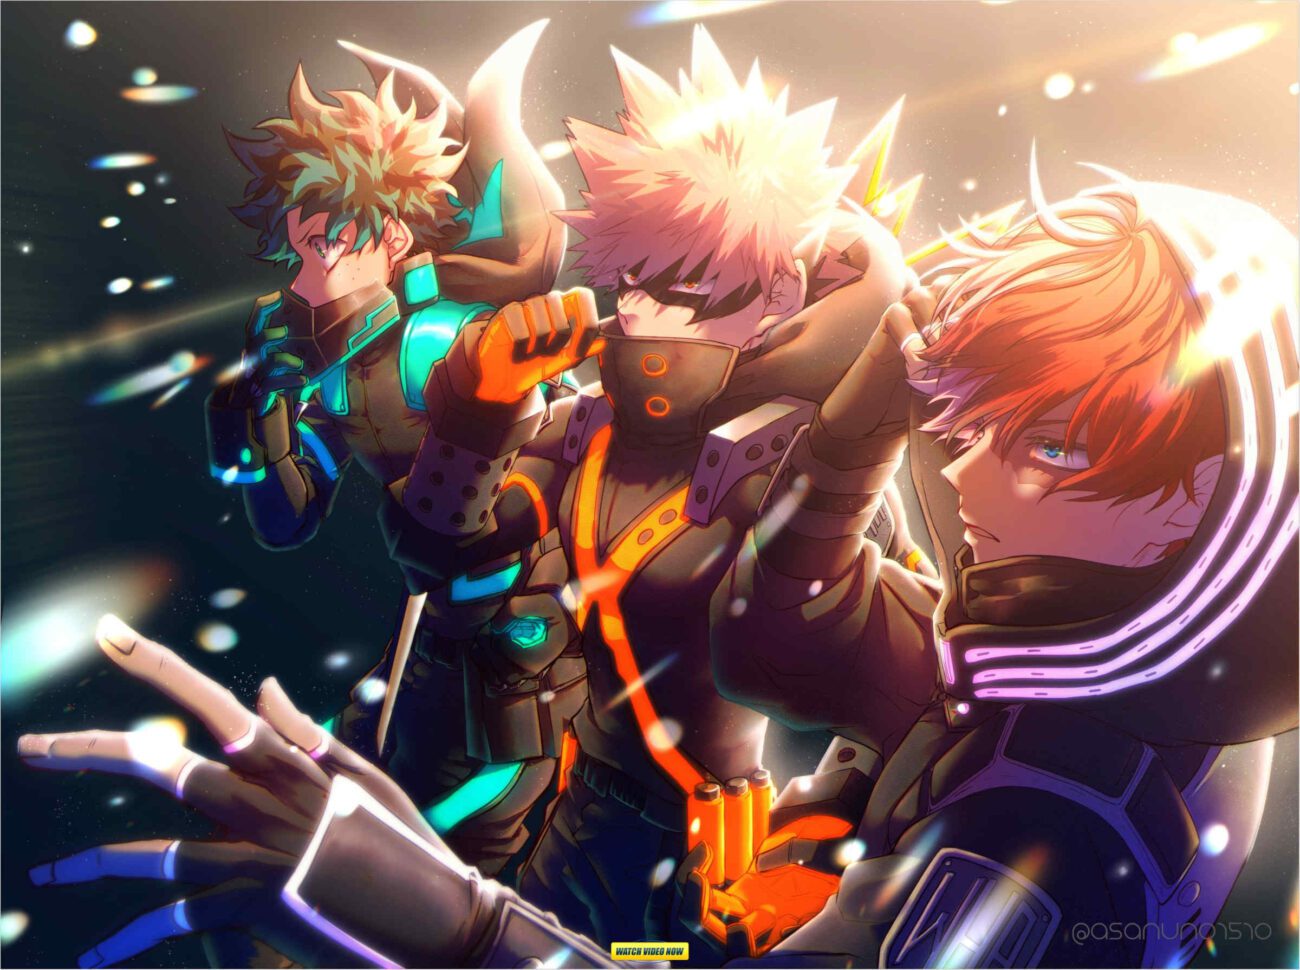 Get ready to watch your favorite heroes battle it out! Go beyond the expected when you watch 'My Hero Academia: World Heroes' Mission' online free.